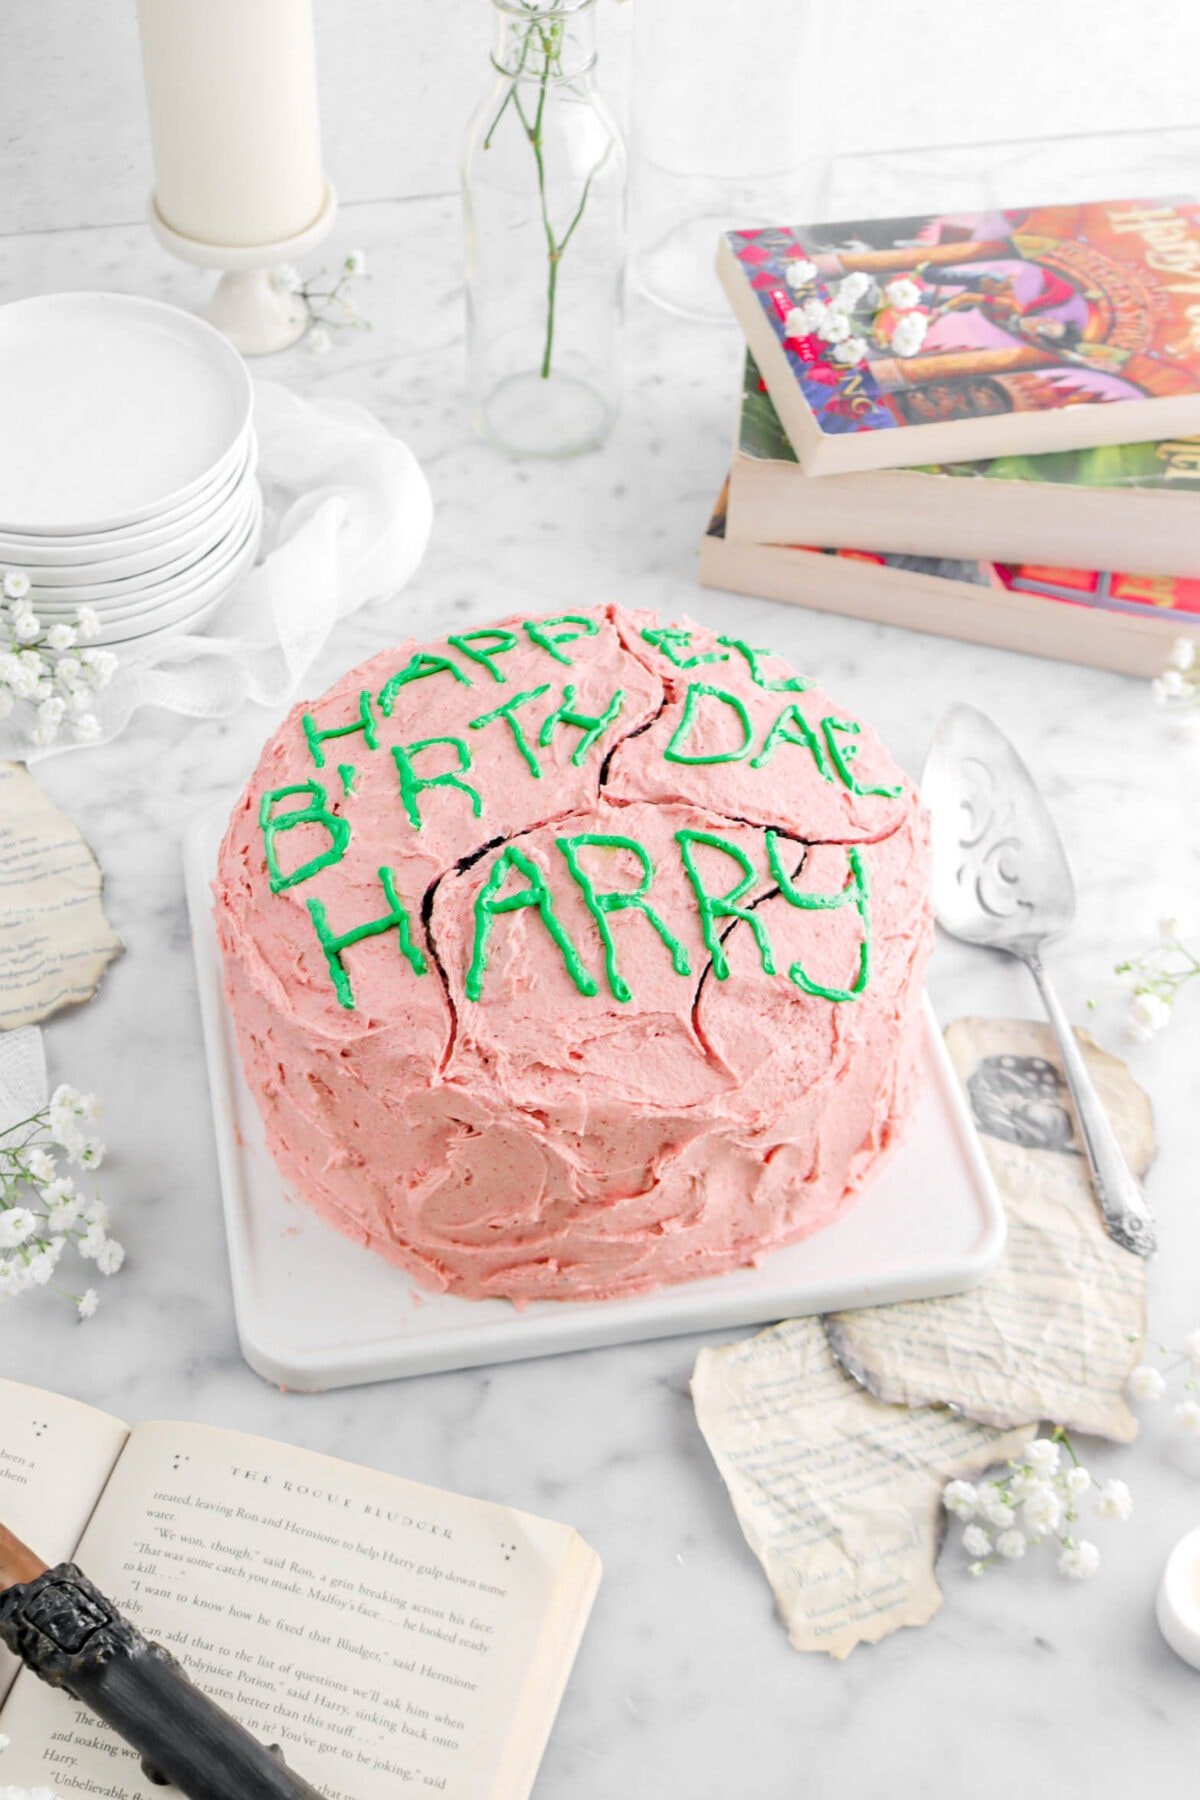 close up angled photo of cake with strawberry frosting and green piping on top, burned book pages around with white flowers and a cake knife beside